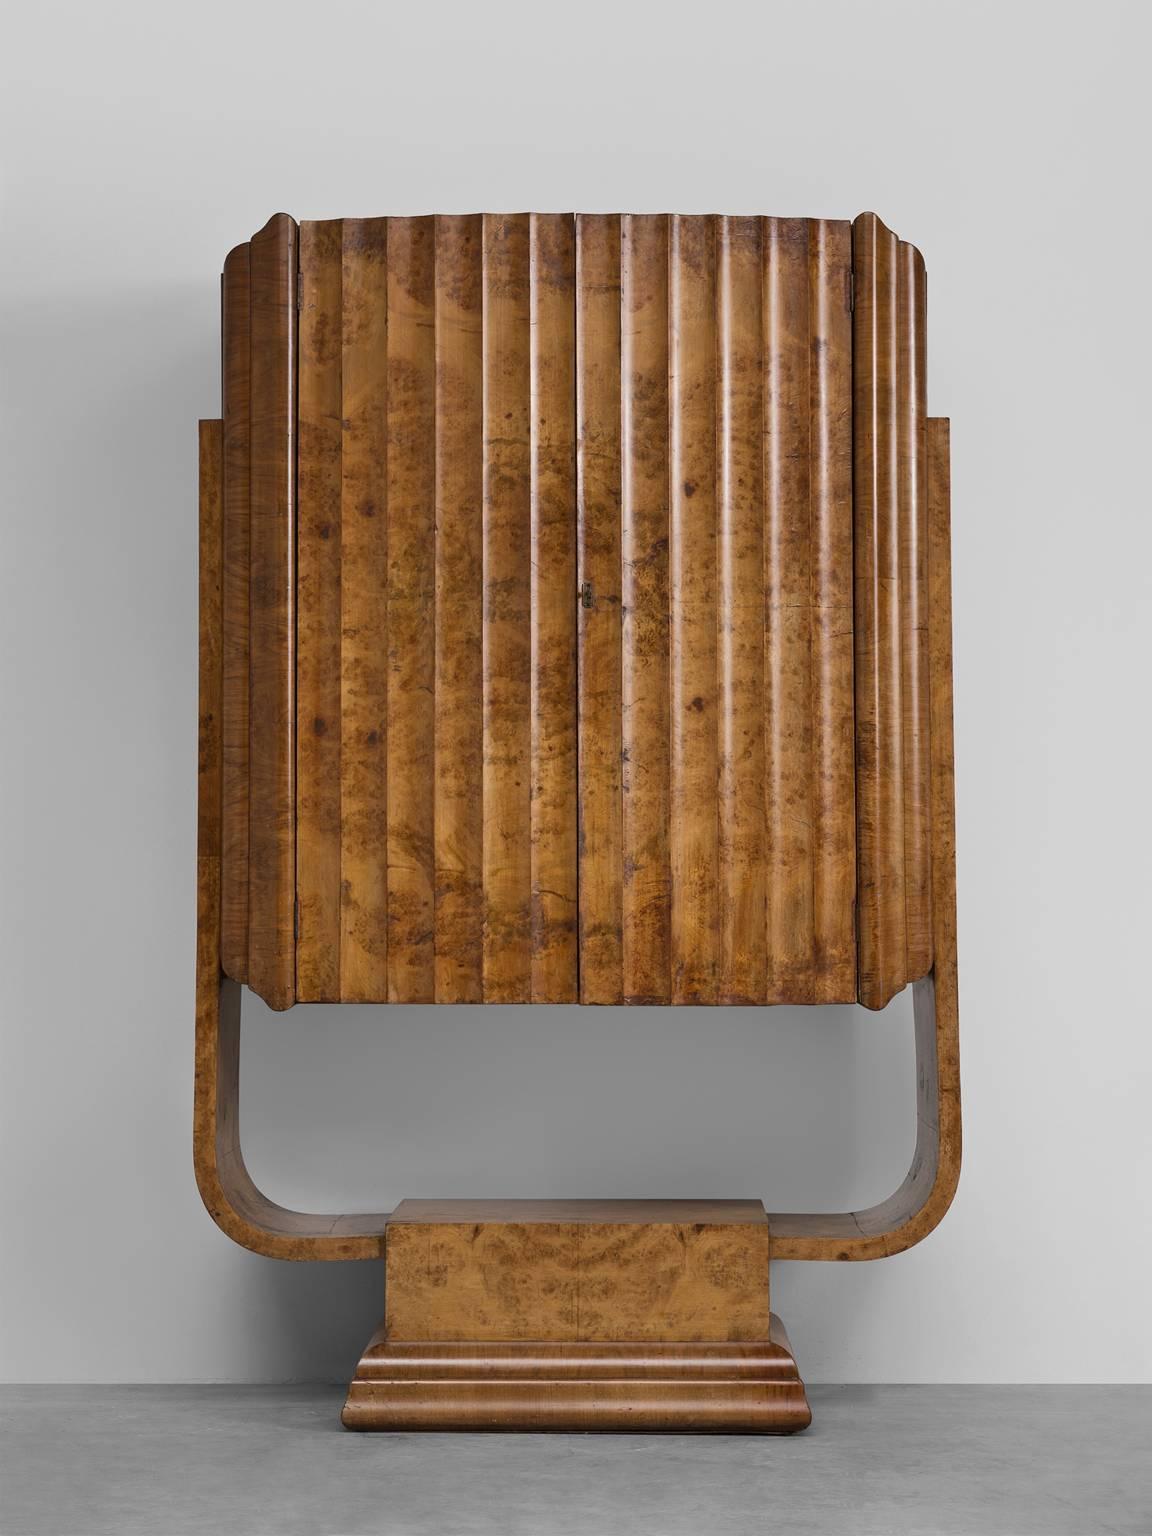 Cabinet, walnut burl, Italy, 1960s.

This sensuous cabinet is executed in walnut burl. The cabinet features a sculptural base from which two curved burl wood arms stretch upwards. The cabinet has two waved burl doors. The waving of the burl wood